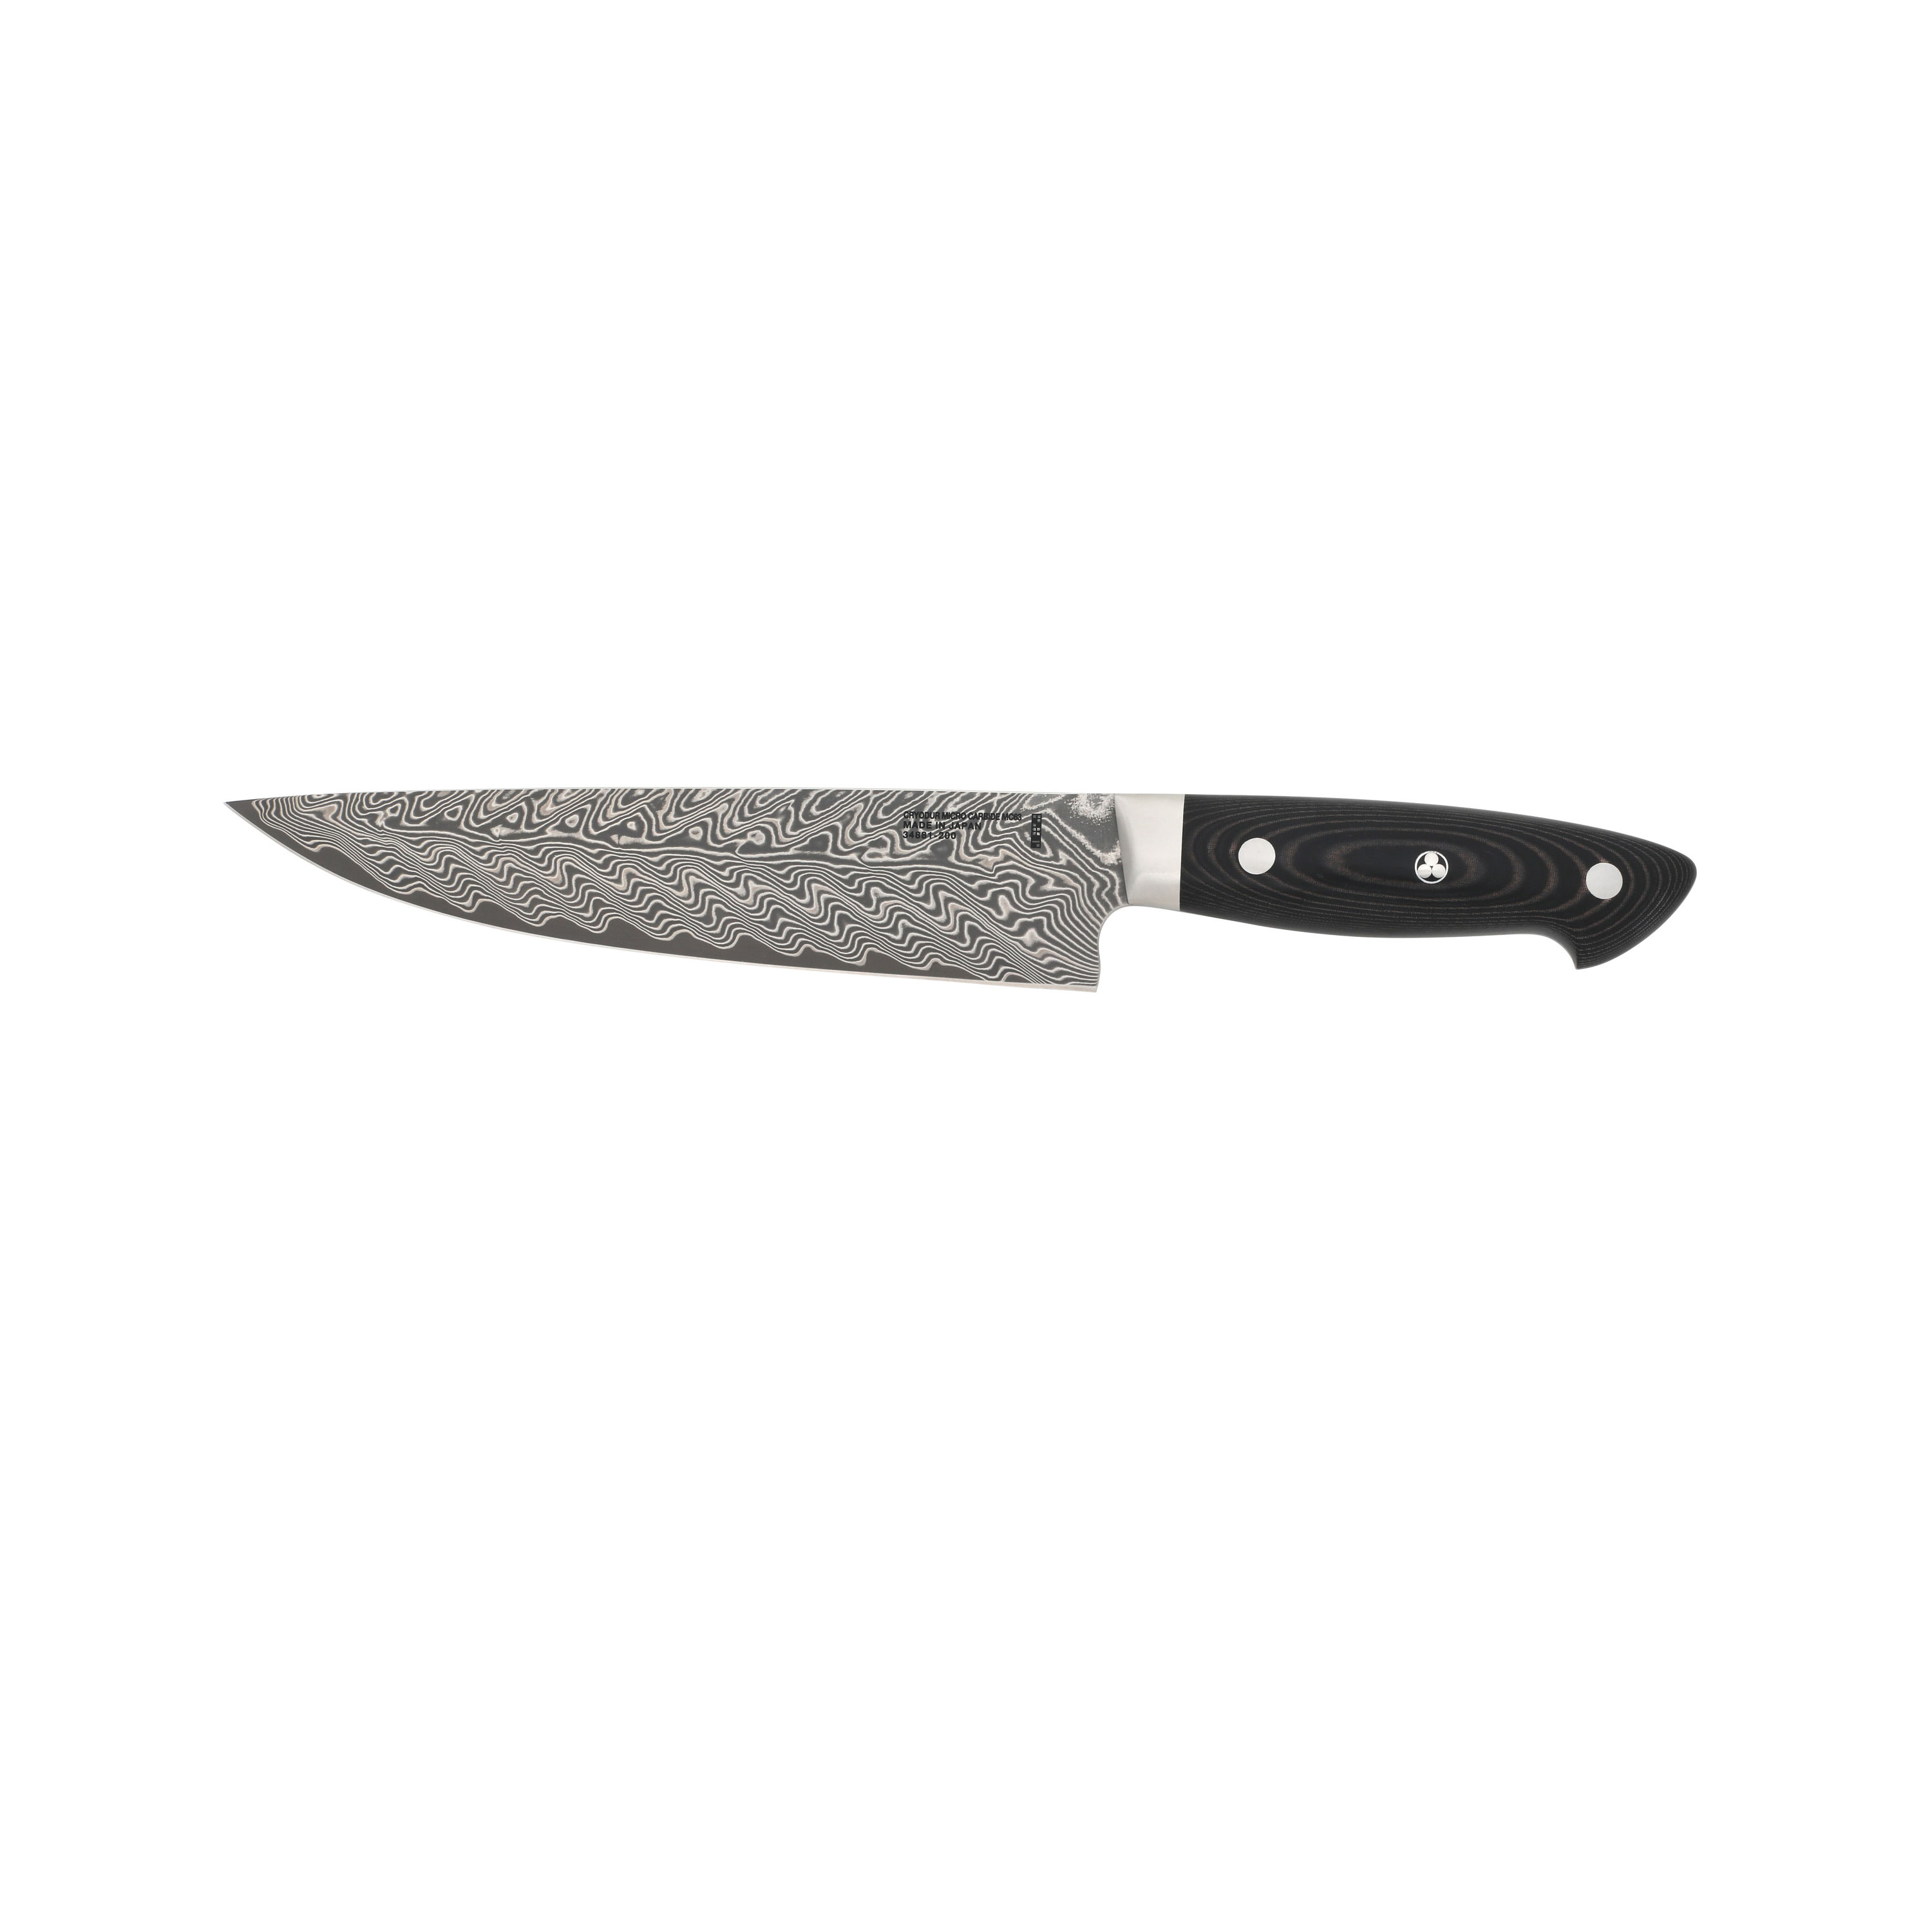 Bob Kramer 3½ Stainless Damascus Paring Knife by Zwilling J.A. Henckels